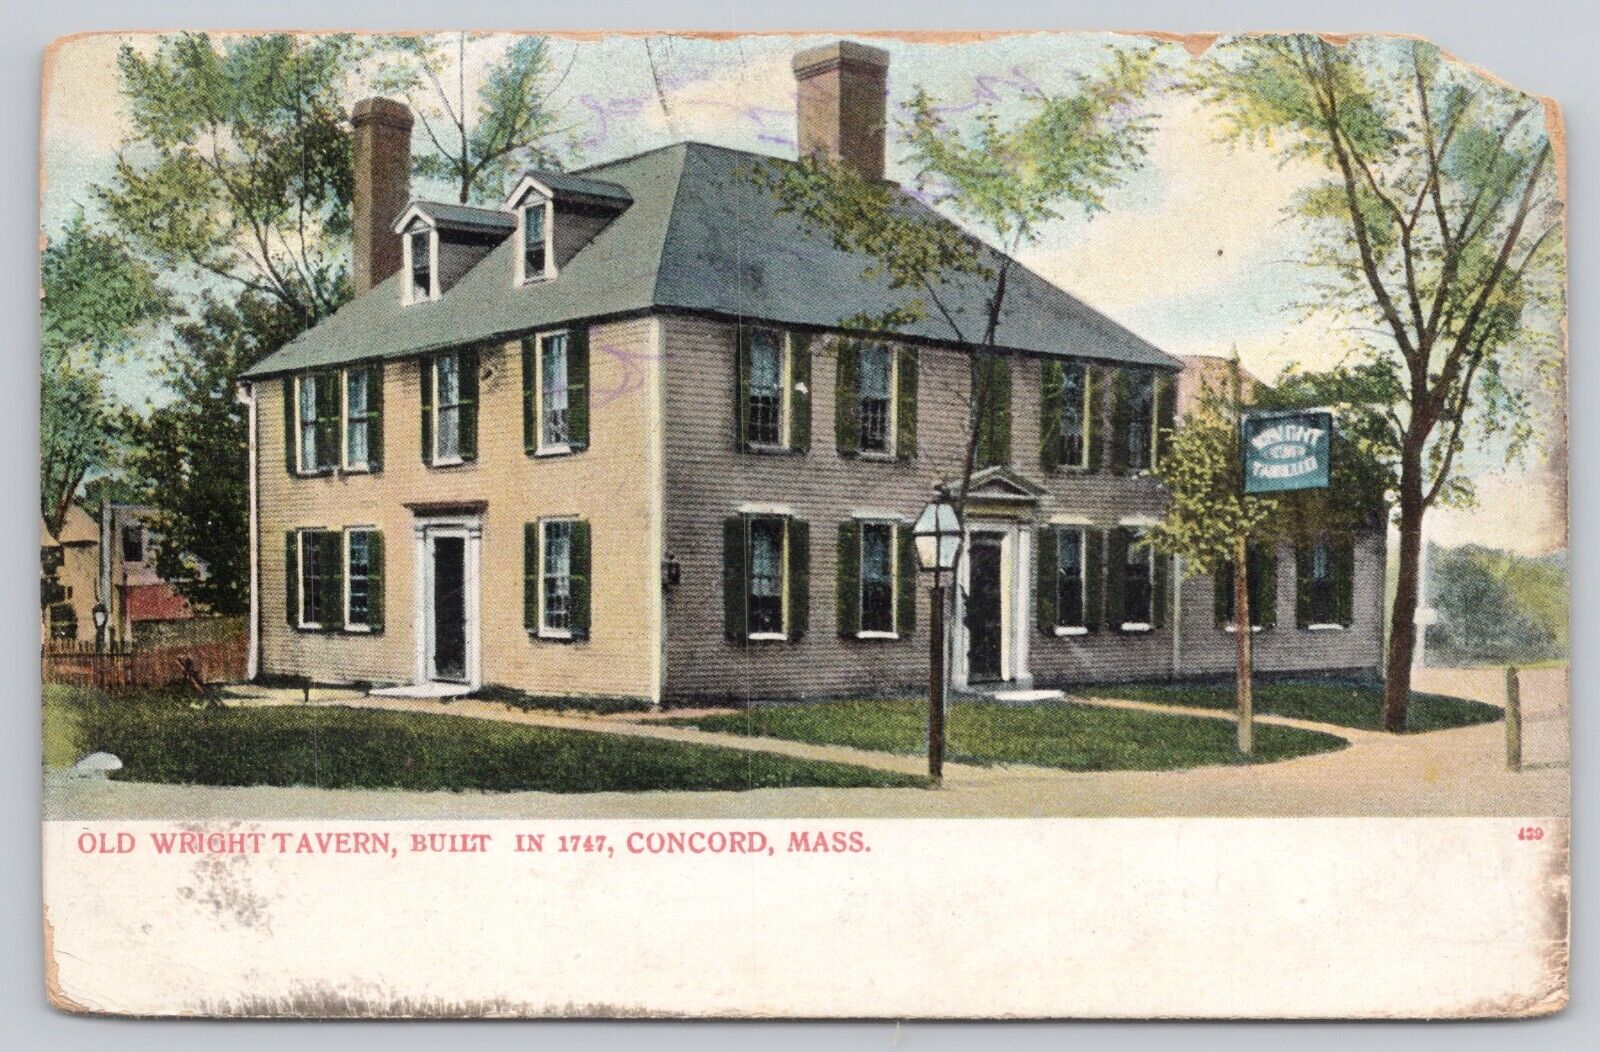 Vtg Post Card Old Wright Tavern, Built in 1747, Concord, Mass. F312